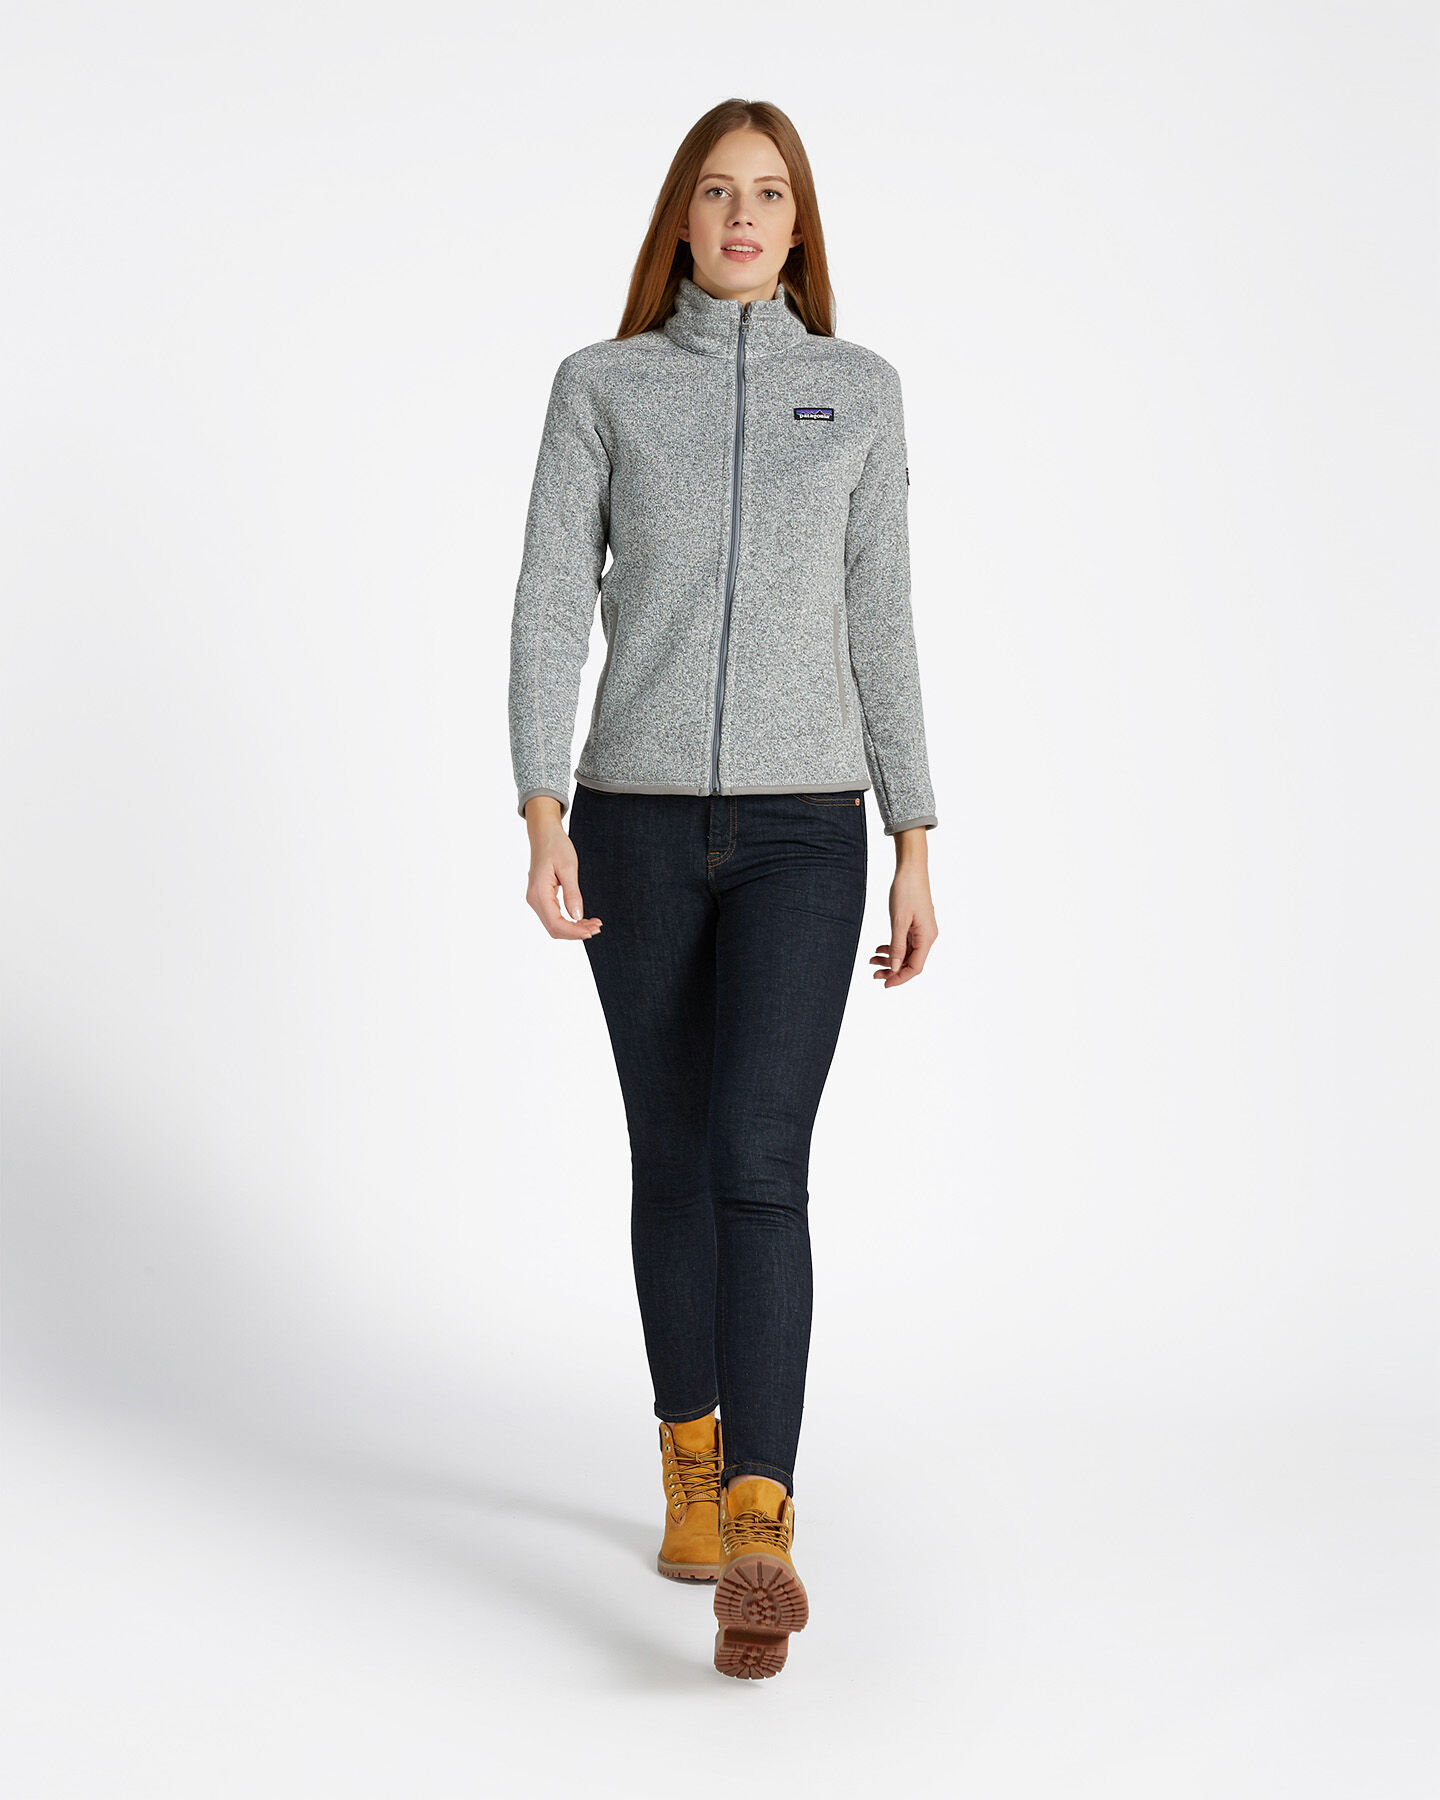  Pile PATAGONIA BETTER SWEATER FLEECE FZ W S4071109|1|XS scatto 3